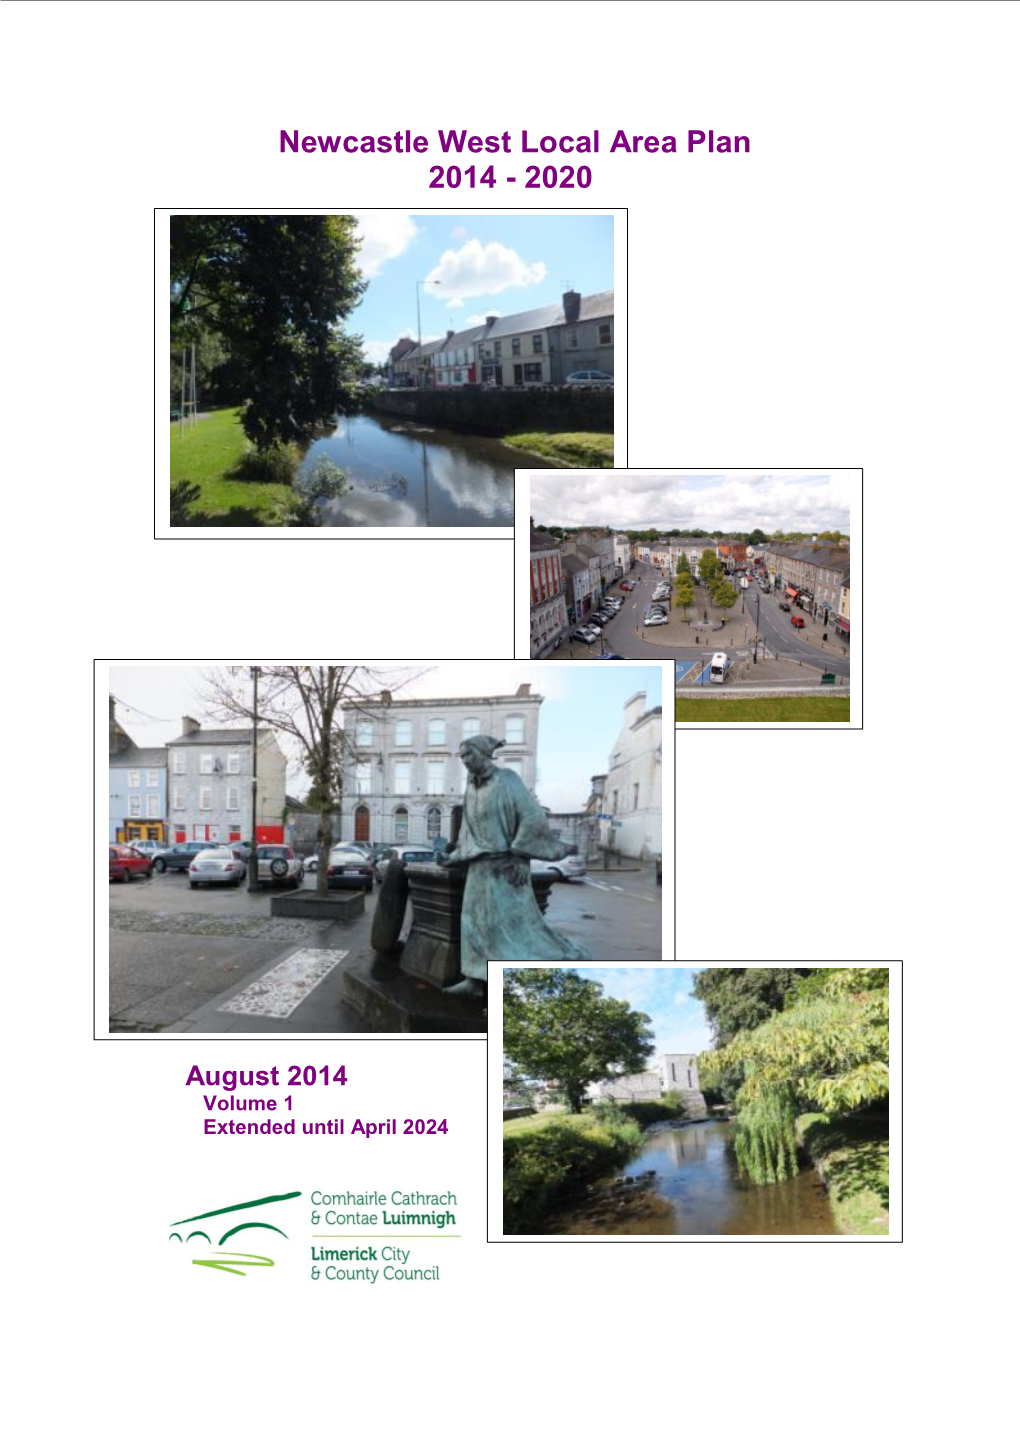 Newcastle West Local Area Plan 2014 - 2020